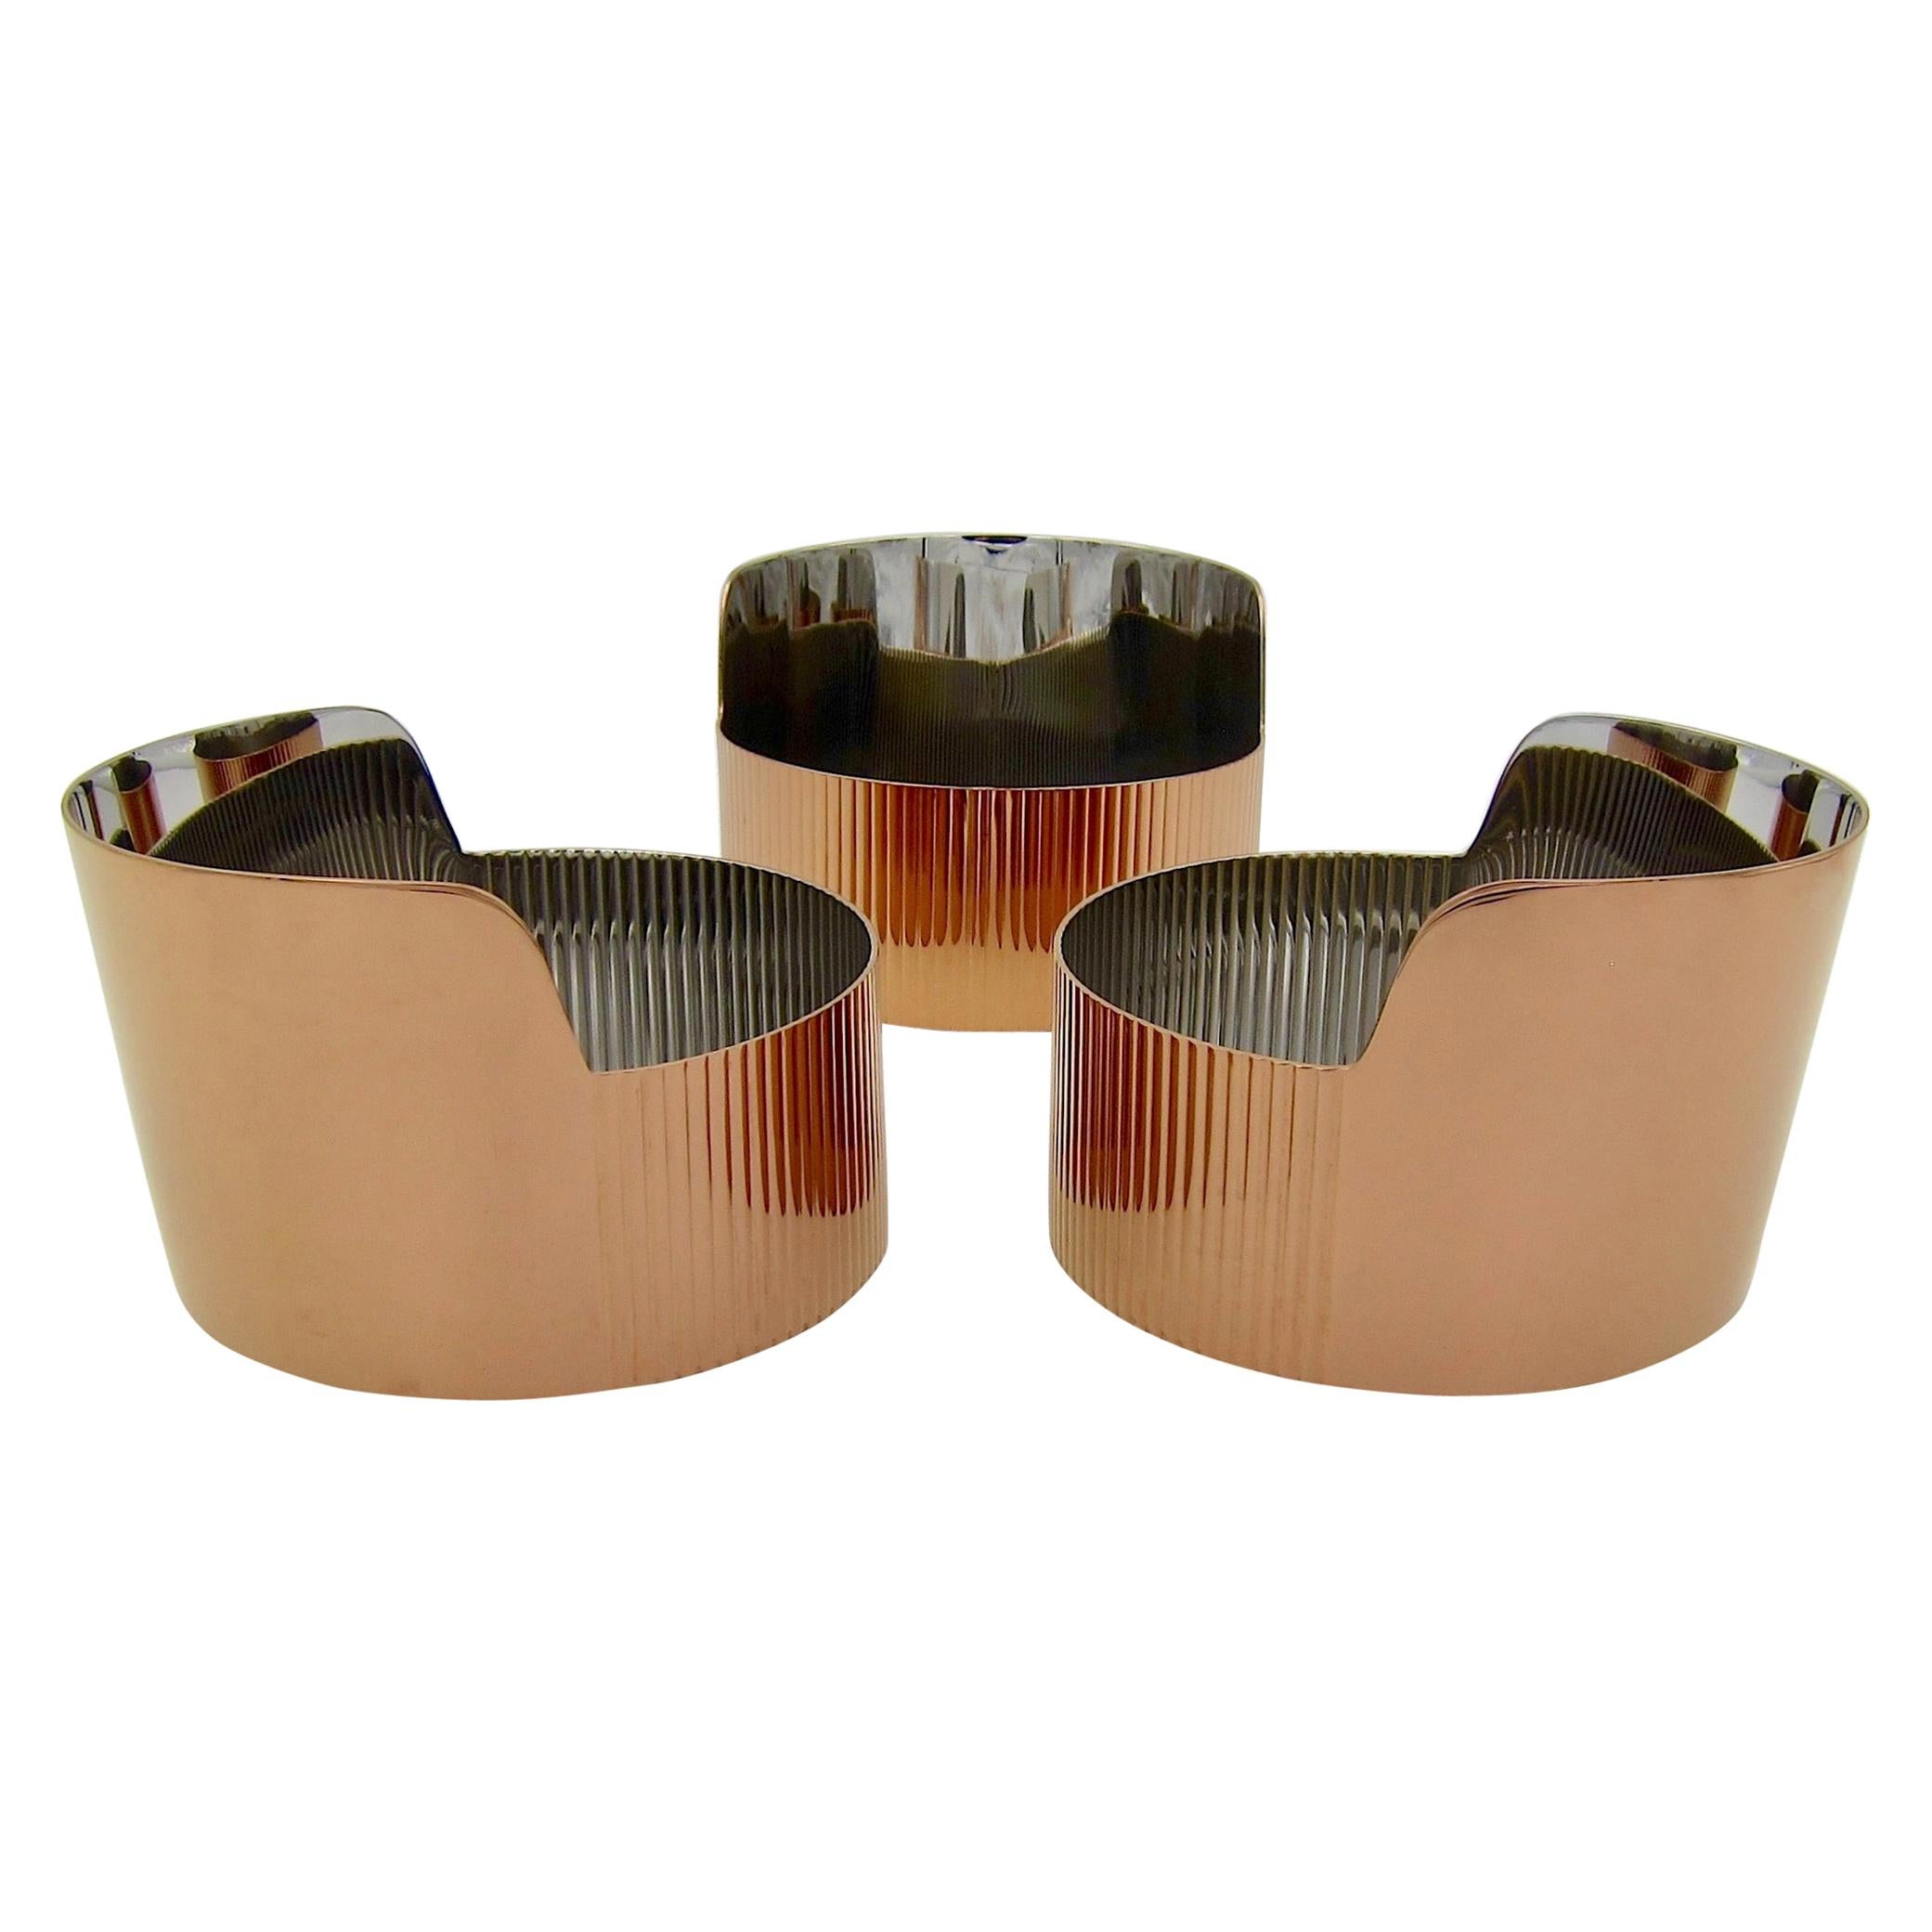 A set of three matching Georg Jensen snack or trinket bowls in stainless steel with a warm and reflective copper-colored and scratch-resistant PVD coating. The sleek Art Deco-inspired Urkiola Collection was a successful 2016 collaboration between